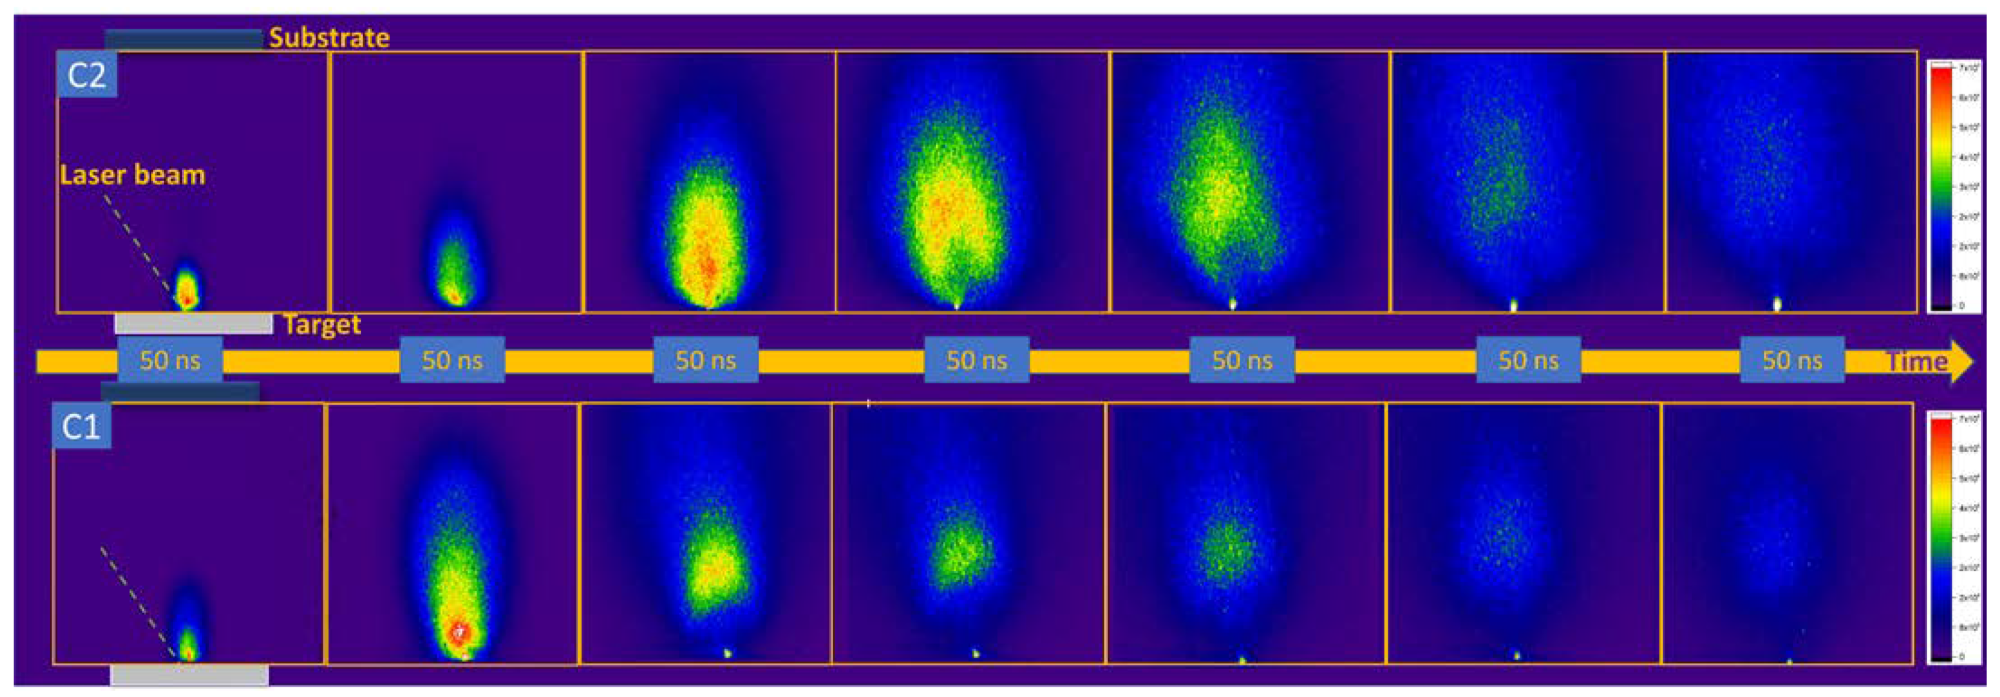 ICCD images of the laser-produced plasmas on C1 (Al2O3 + SiO2) and C2 (Al2O3 + TiO2 + WC) on a 1.5 µs time span.